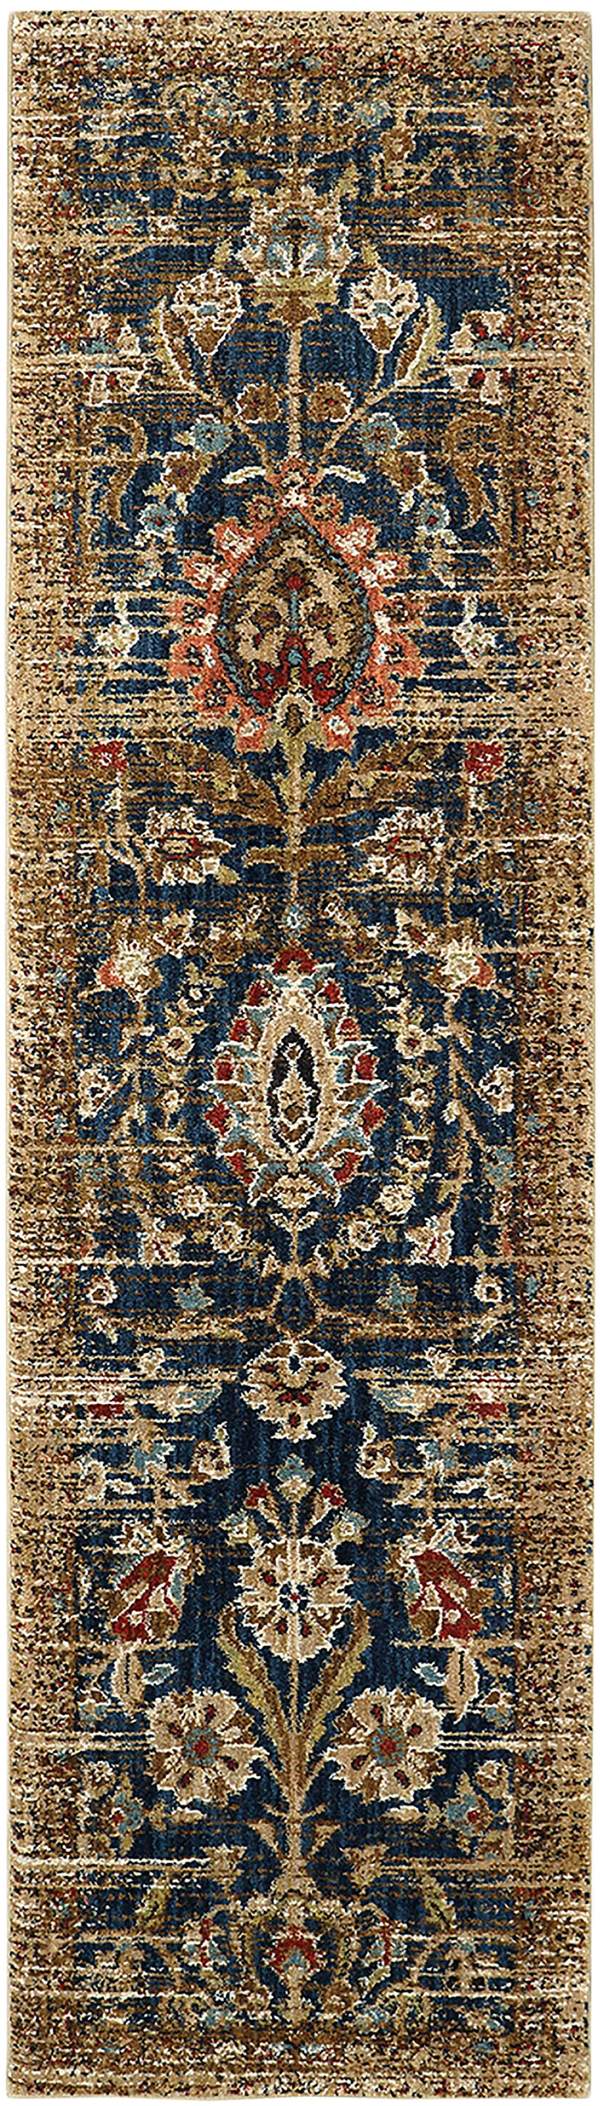 Traditional & Oriental Rugs Spice Market Charax Gold 90666-10034 Medium Blue - Navy & Lt. Gold - Gold Machine Made Rug